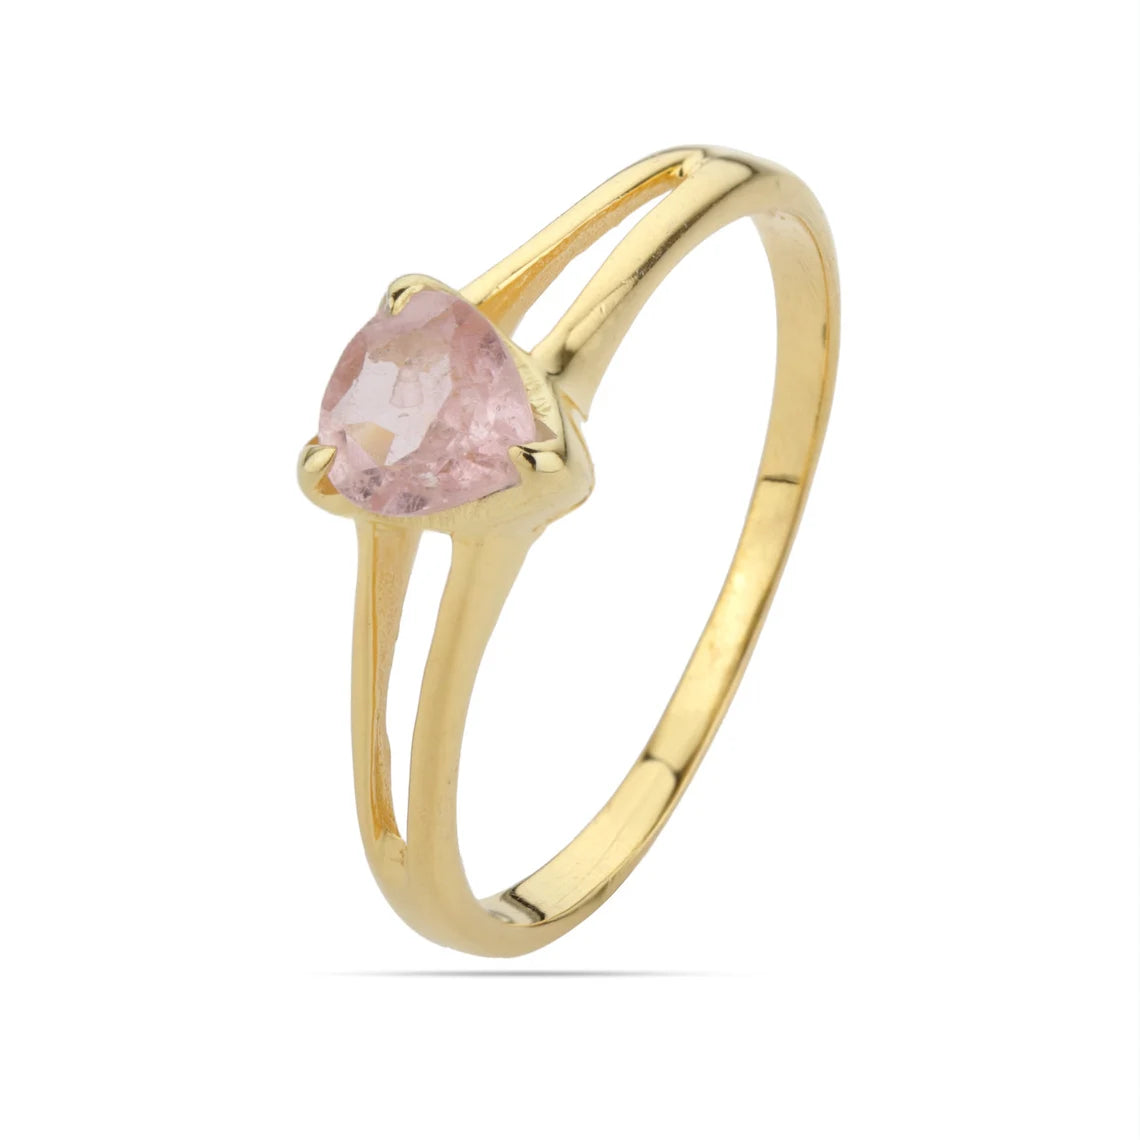 Light Pink Tourmaline Gold Ring, Trillion Tourmaline Engagement Ring, Tourmaline Gemstone Gold Plated Sterling Silver Ring